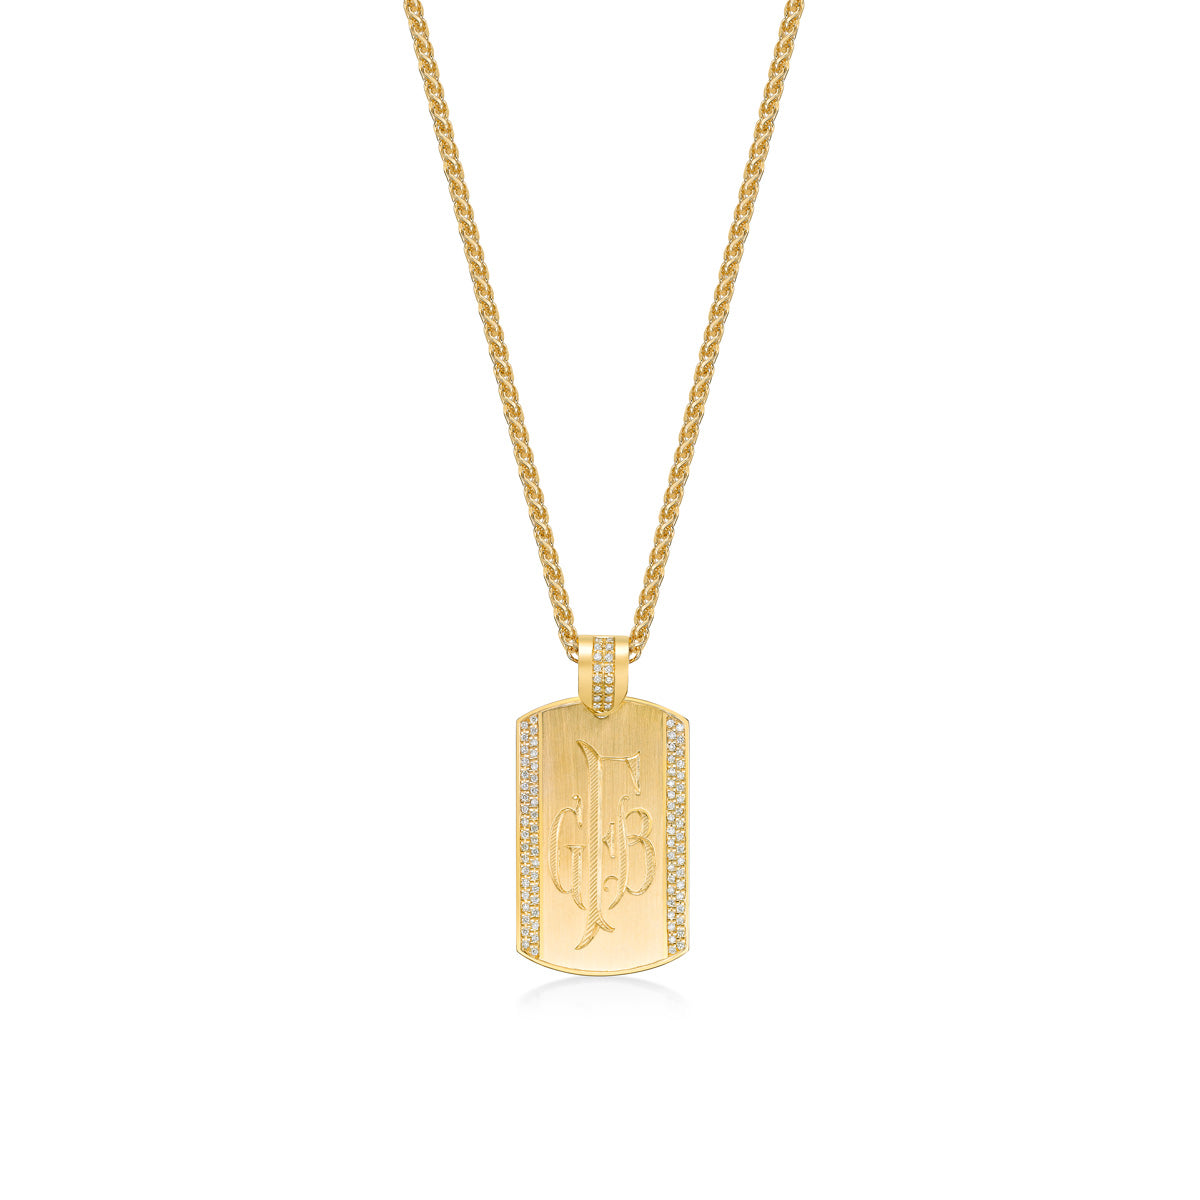 Hand-engraved 18K Yellow Gold Men's Tag Pendant with Pave Diamond Edges on a 21 inch wheat chain